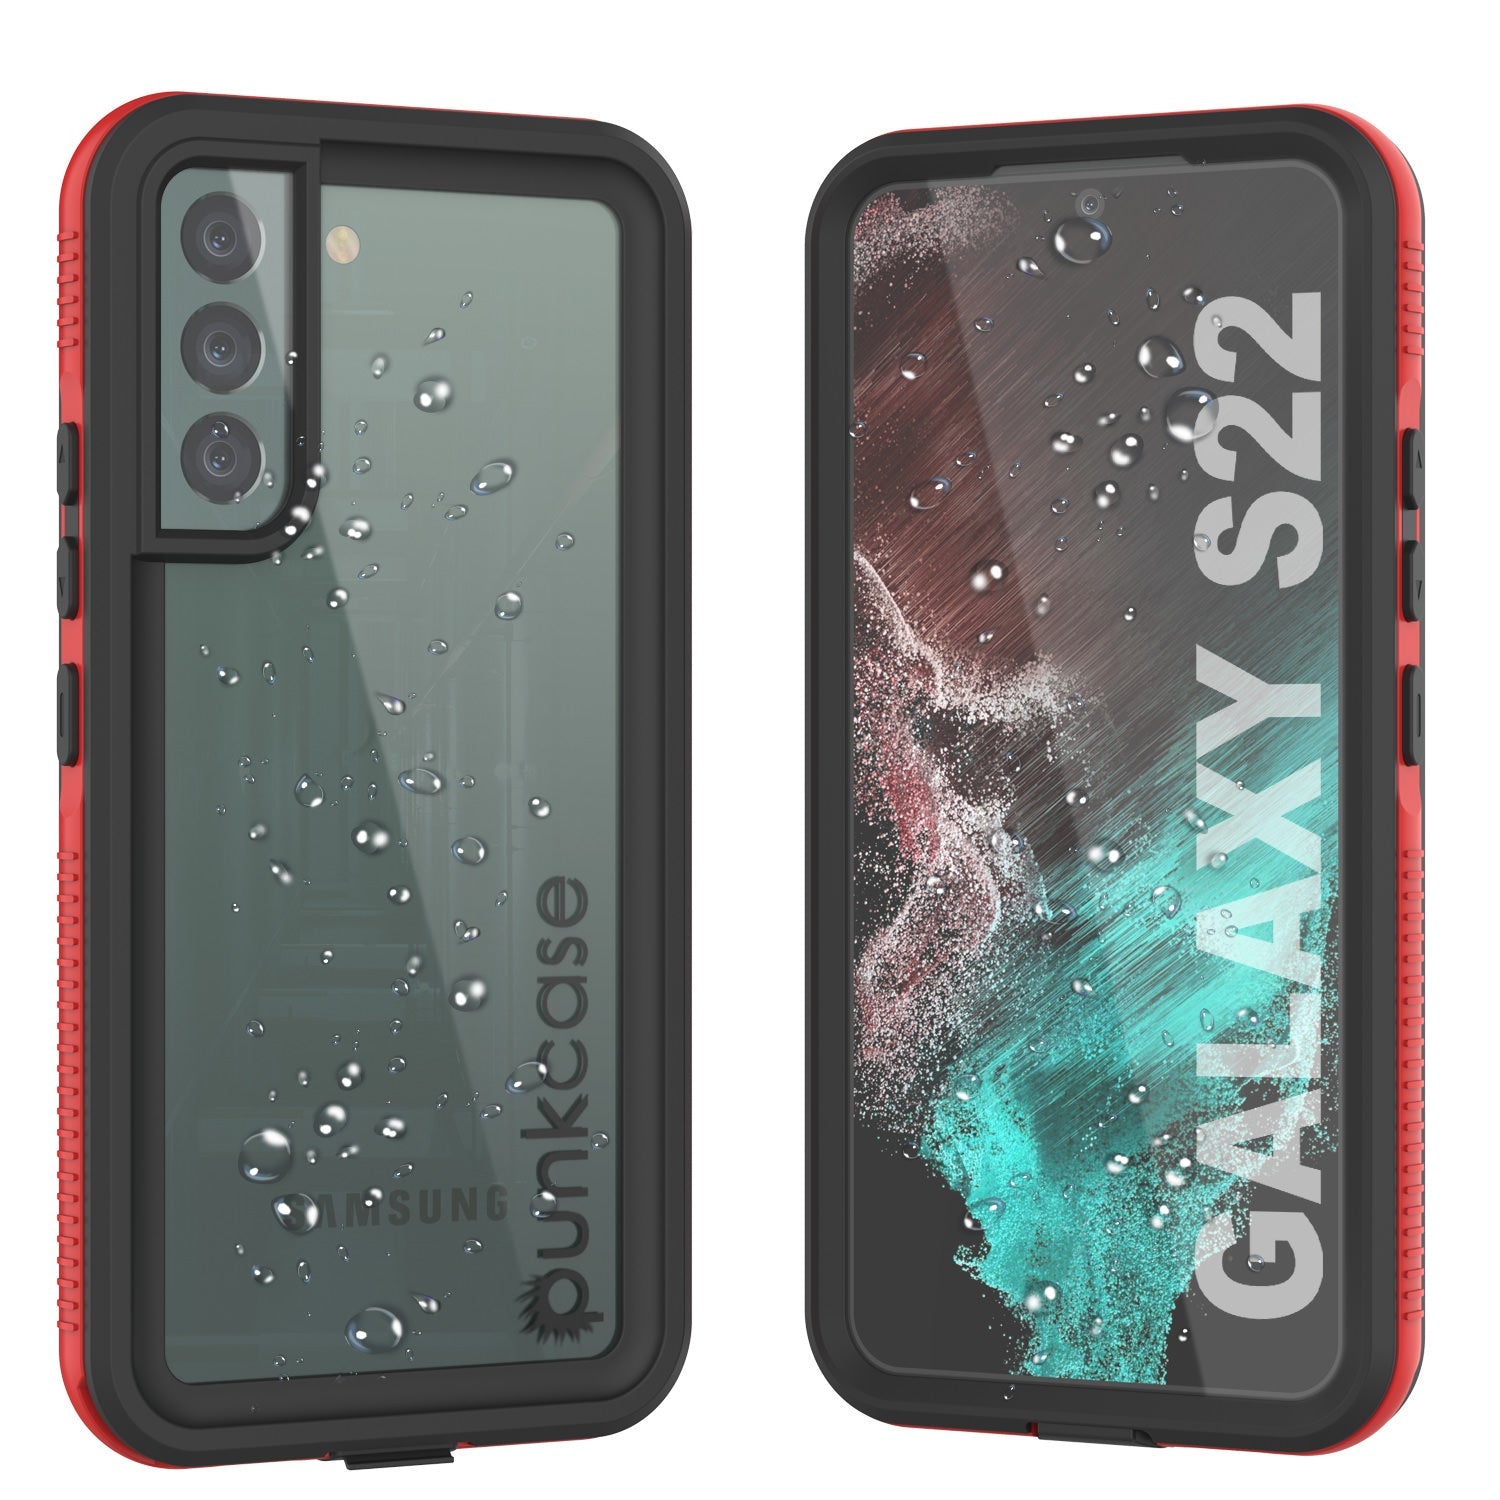 Galaxy S22 Waterproof Case PunkCase Ultimato Red Thin 6.6ft Underwater IP68 Shock/Snow Proof [Red]